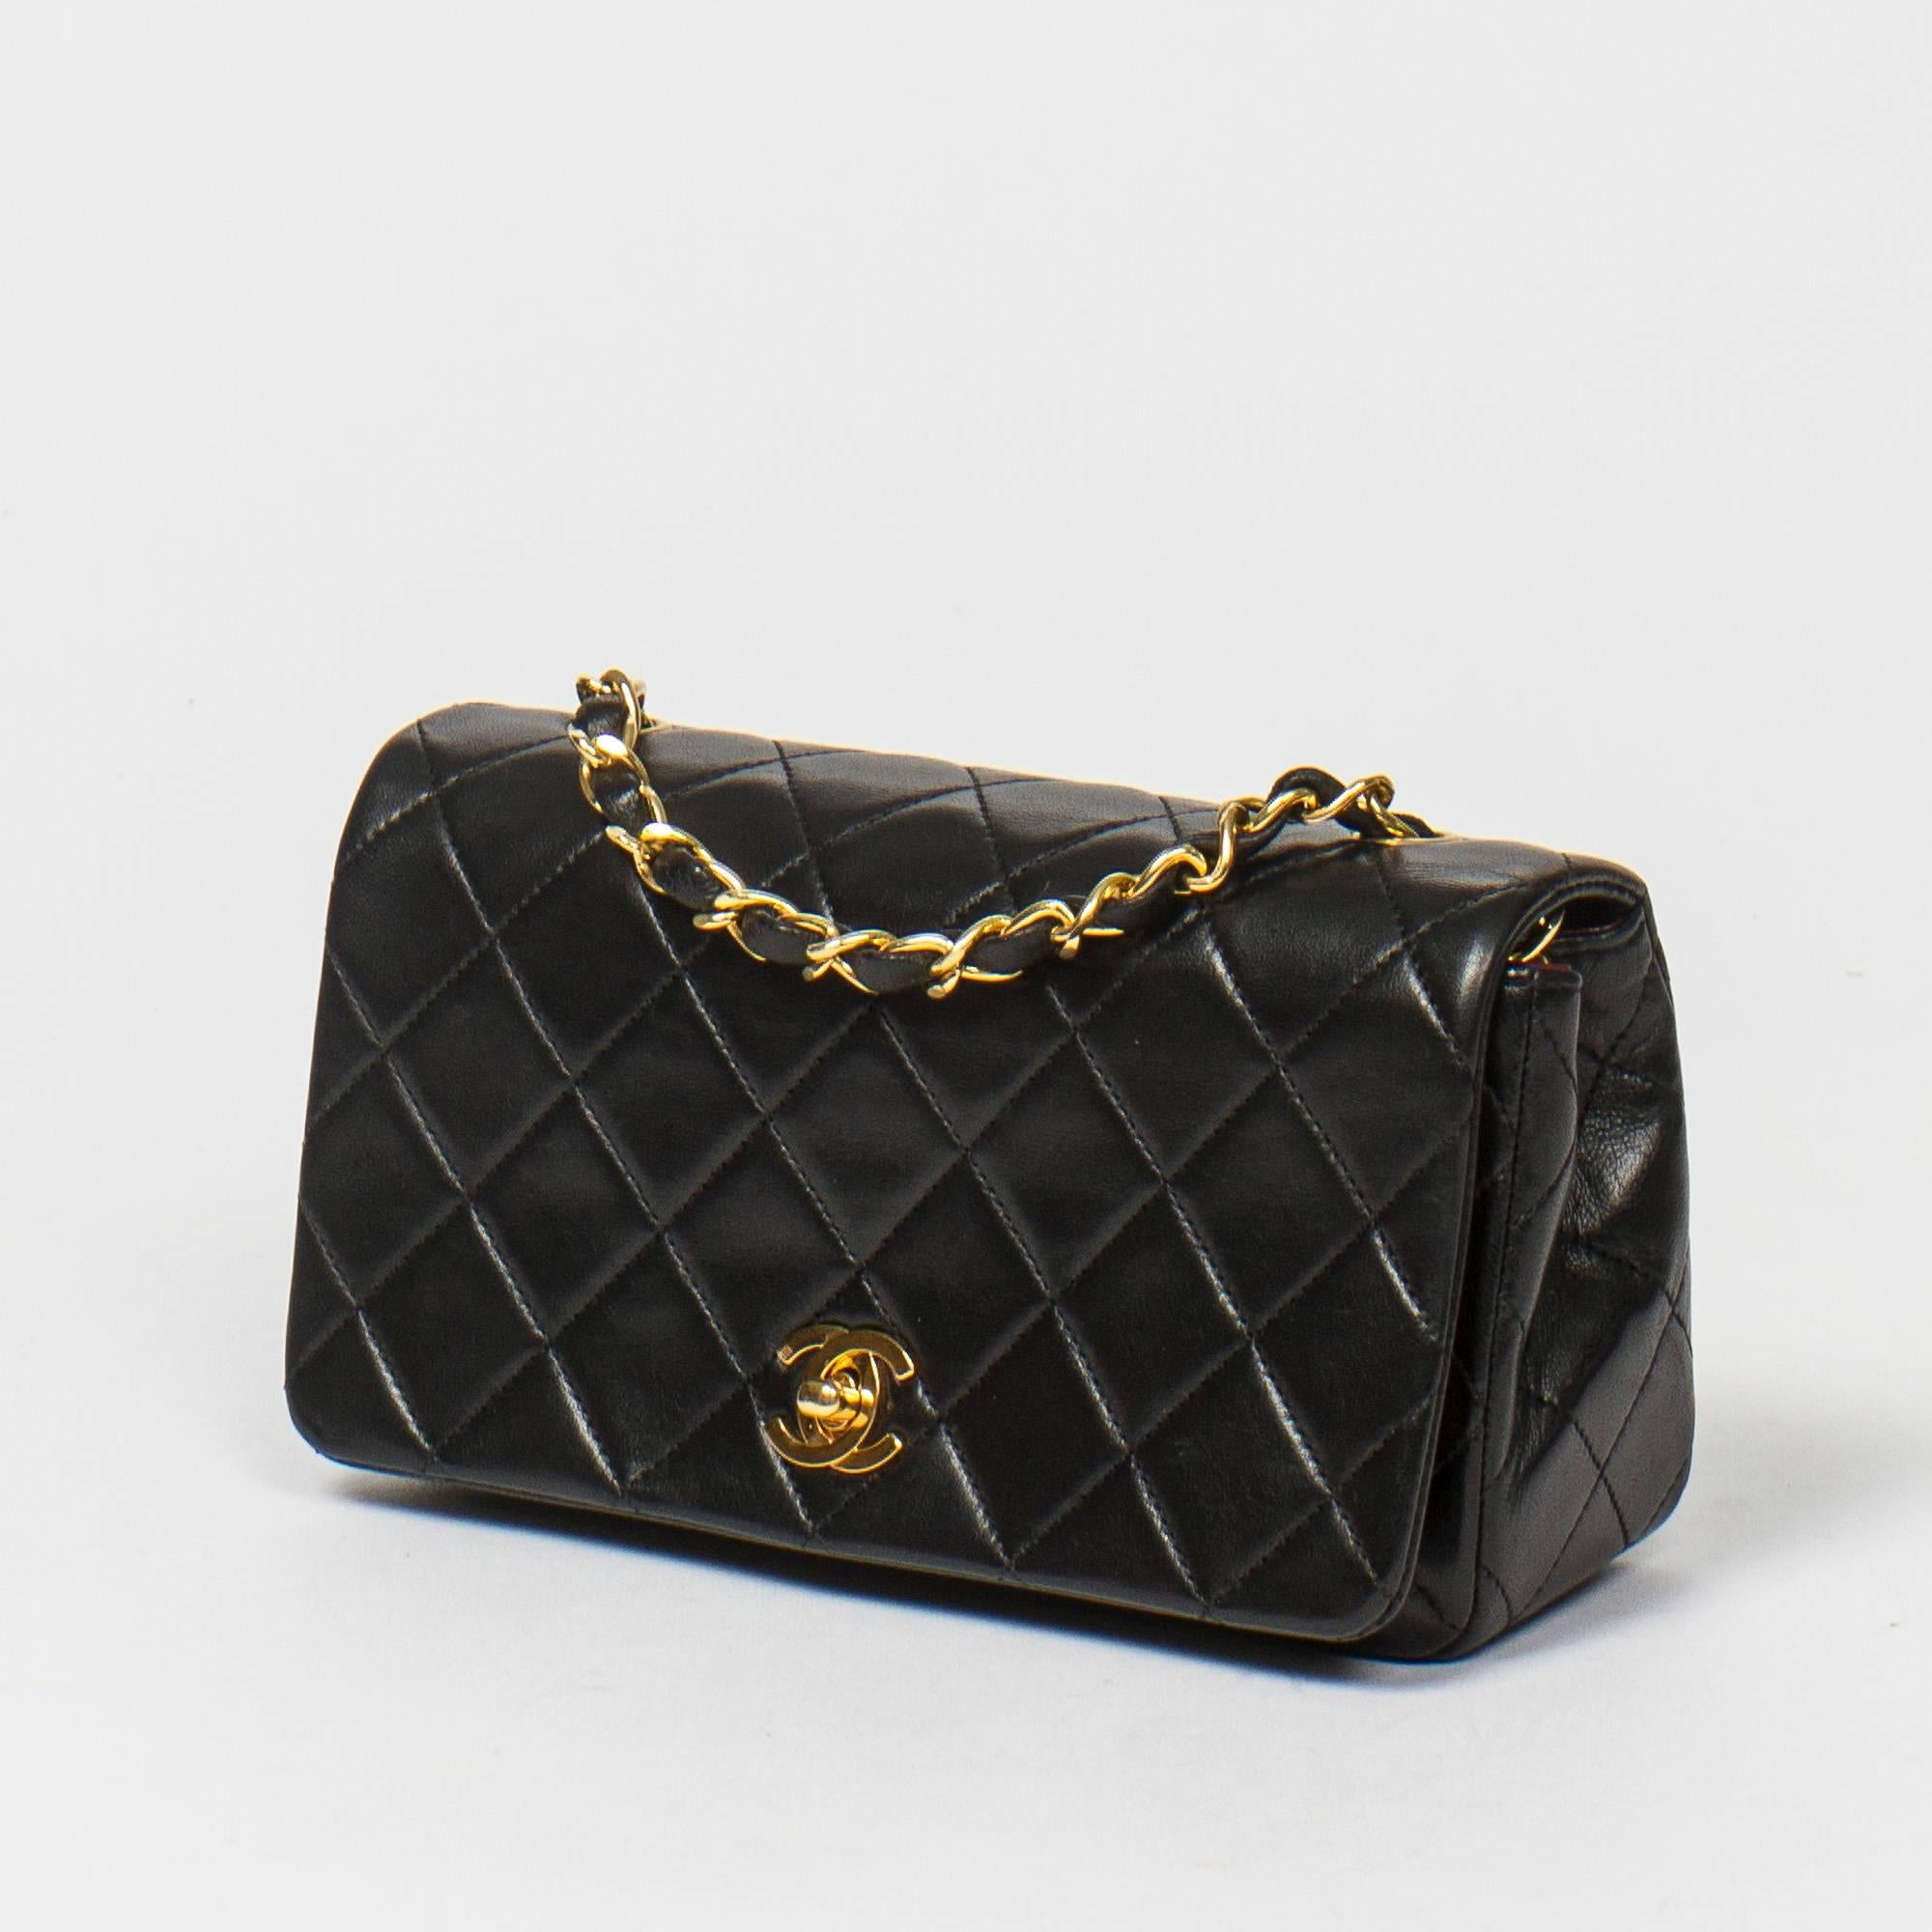 Vintage Full Flap in black quilted leather with gold tone chain strap interlaced with black leather. Turnlock 